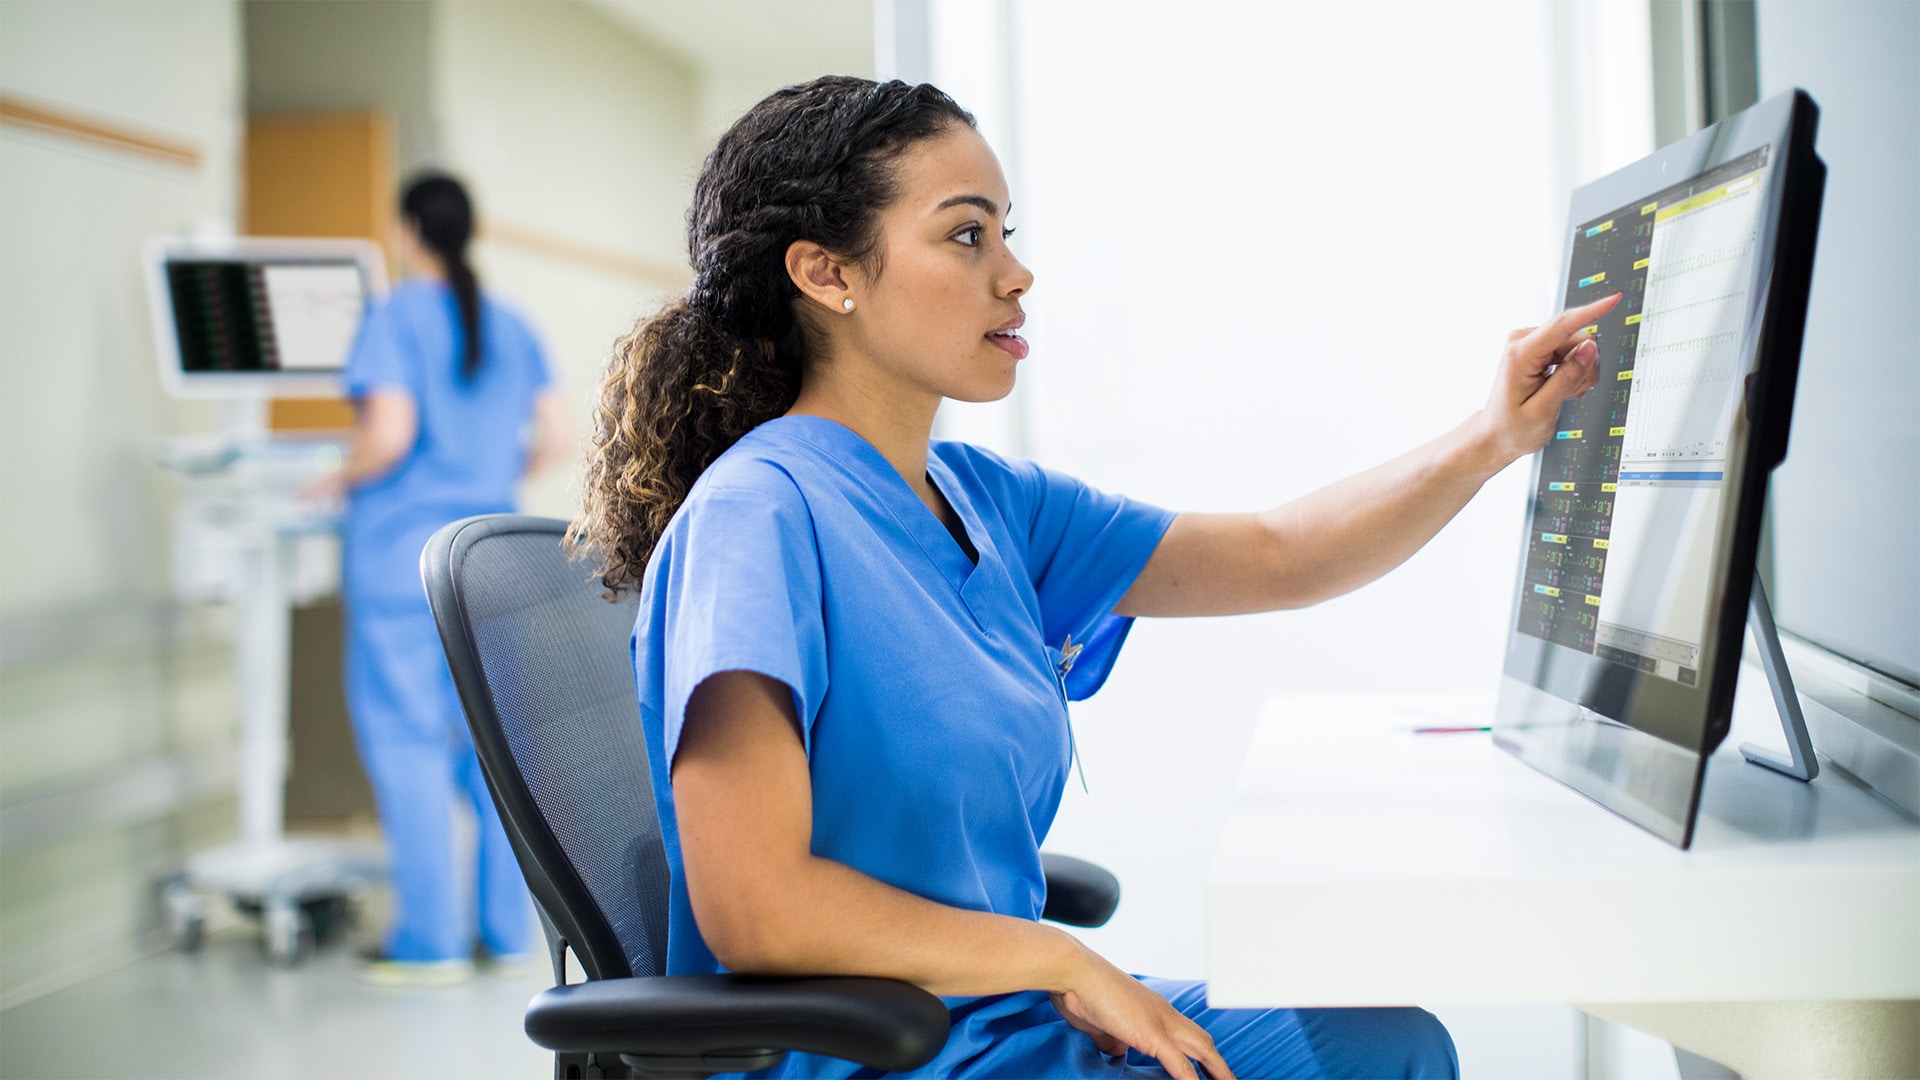 Five reasons why healthcare providers are adopting as-a-service models in patient monitoring